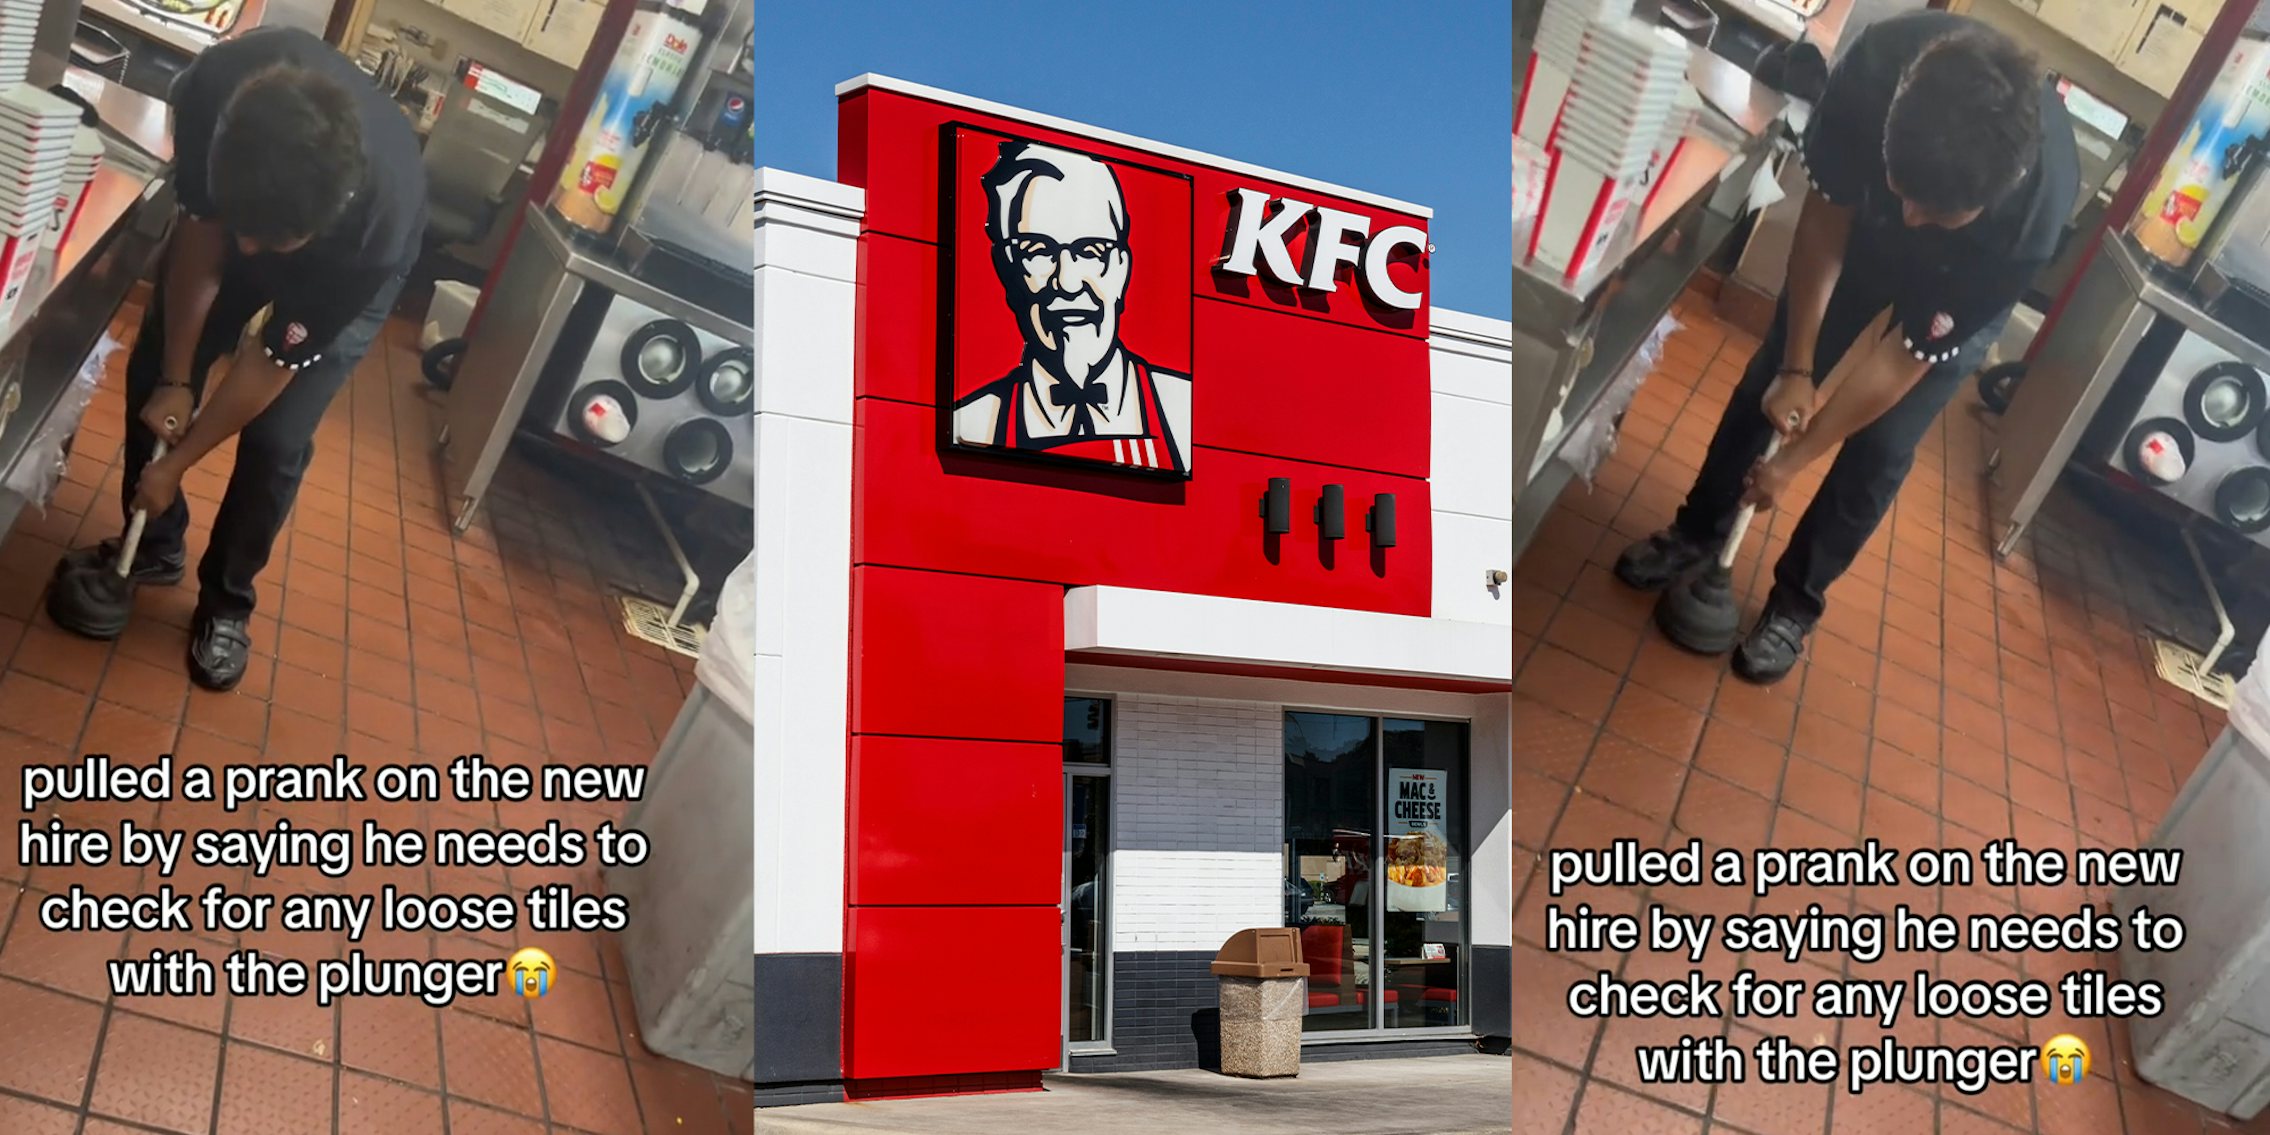 KFC worker tells new hire he has to check for loose tiles with plunger